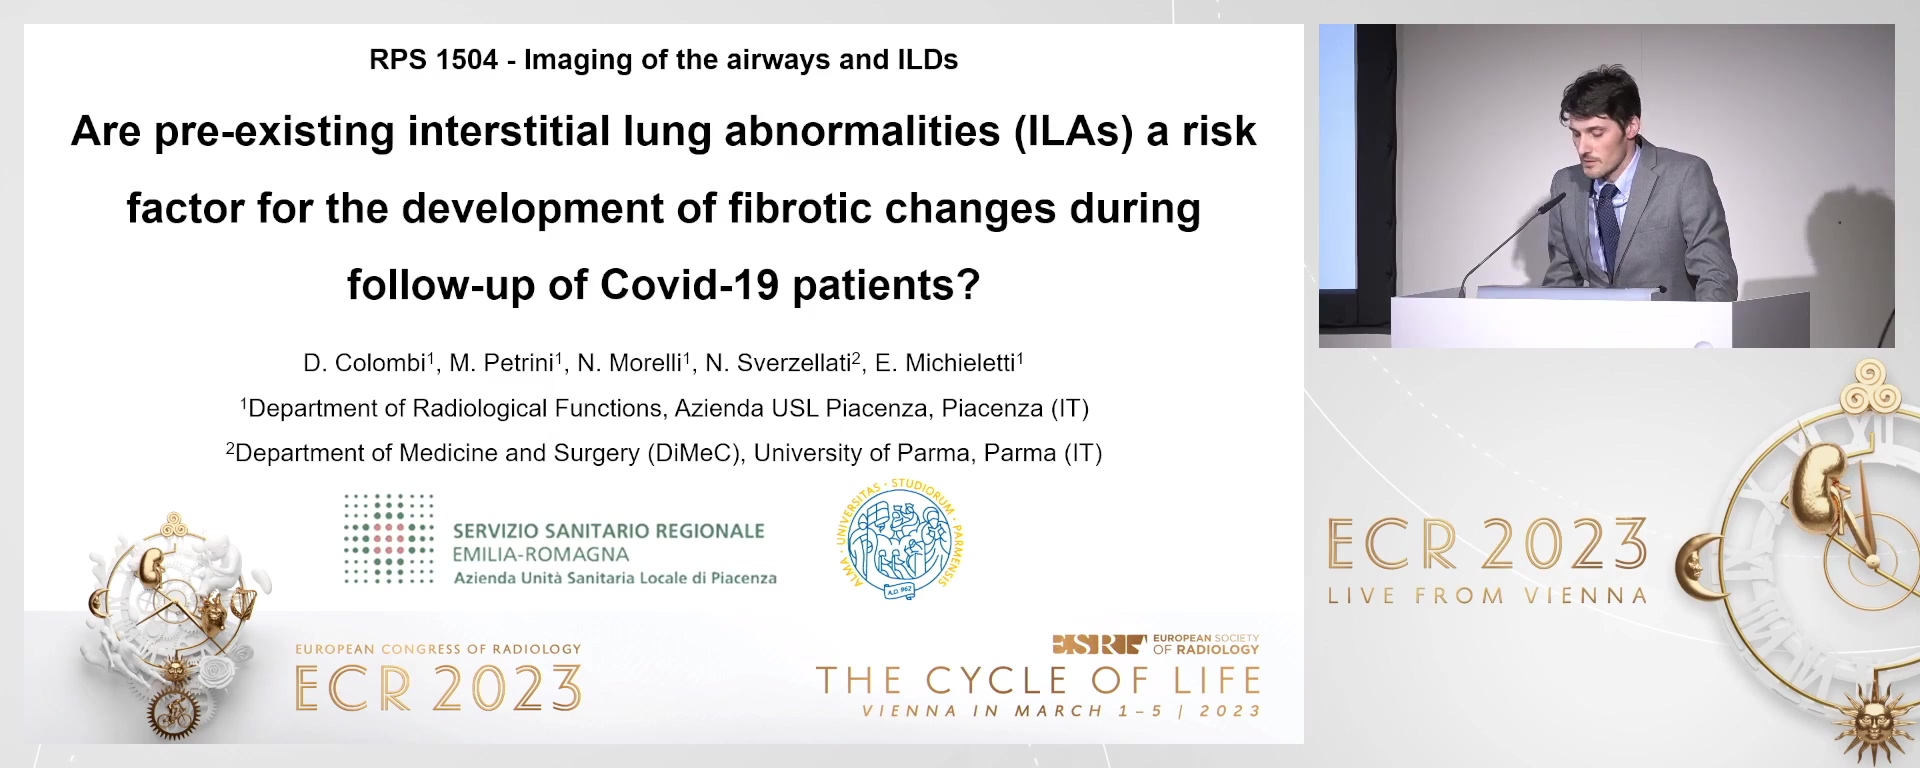 Are pre-existing interstitial lung abnormalities (ILAs) a risk factor for the development of fibrotic changes during follow-up of Covid-19 patients? - Davide  Colombi, Piacenza / IT